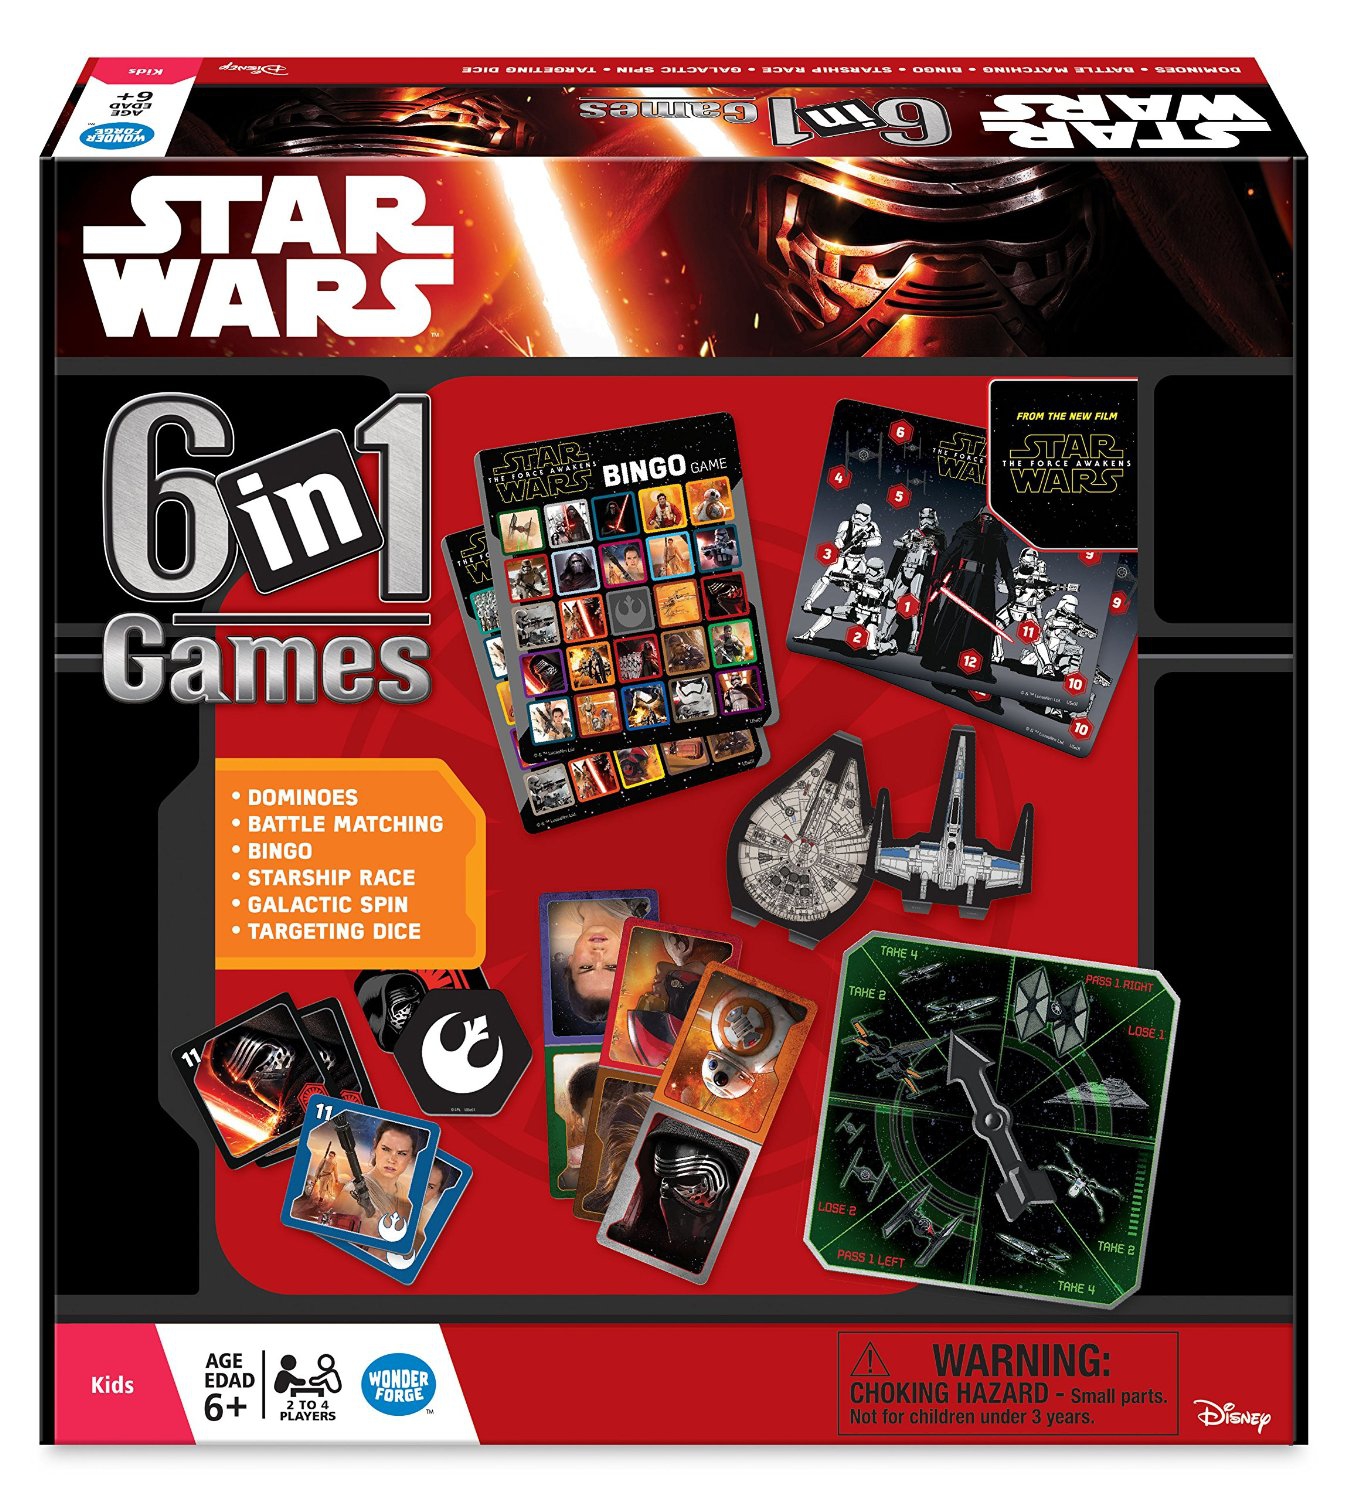 Disney Star Wars 'The Force Awakens' 6 In 1 Board Games Game